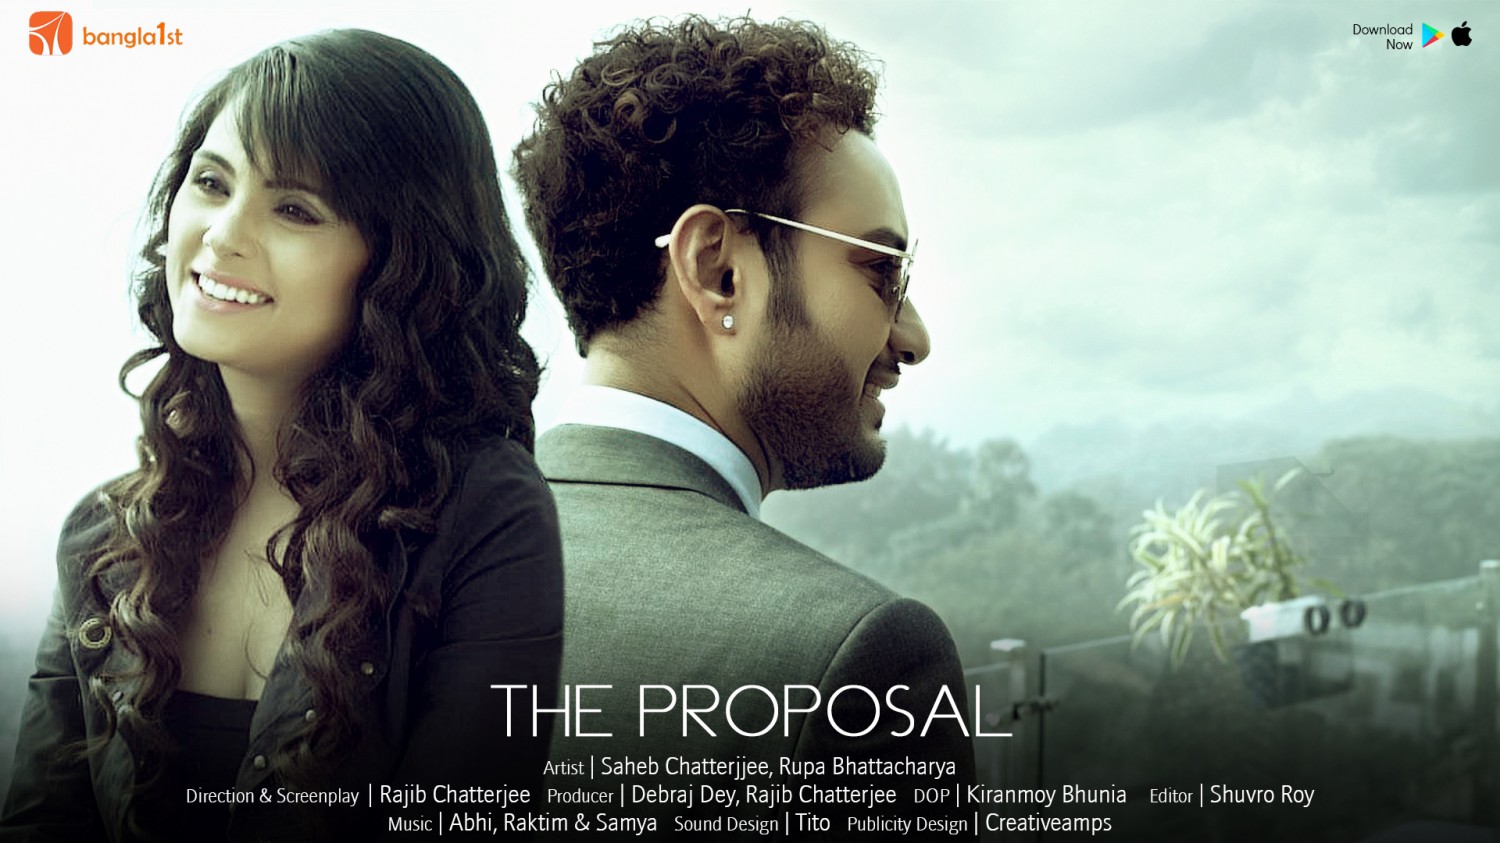 Extra Large Movie Poster Image for The Proposal